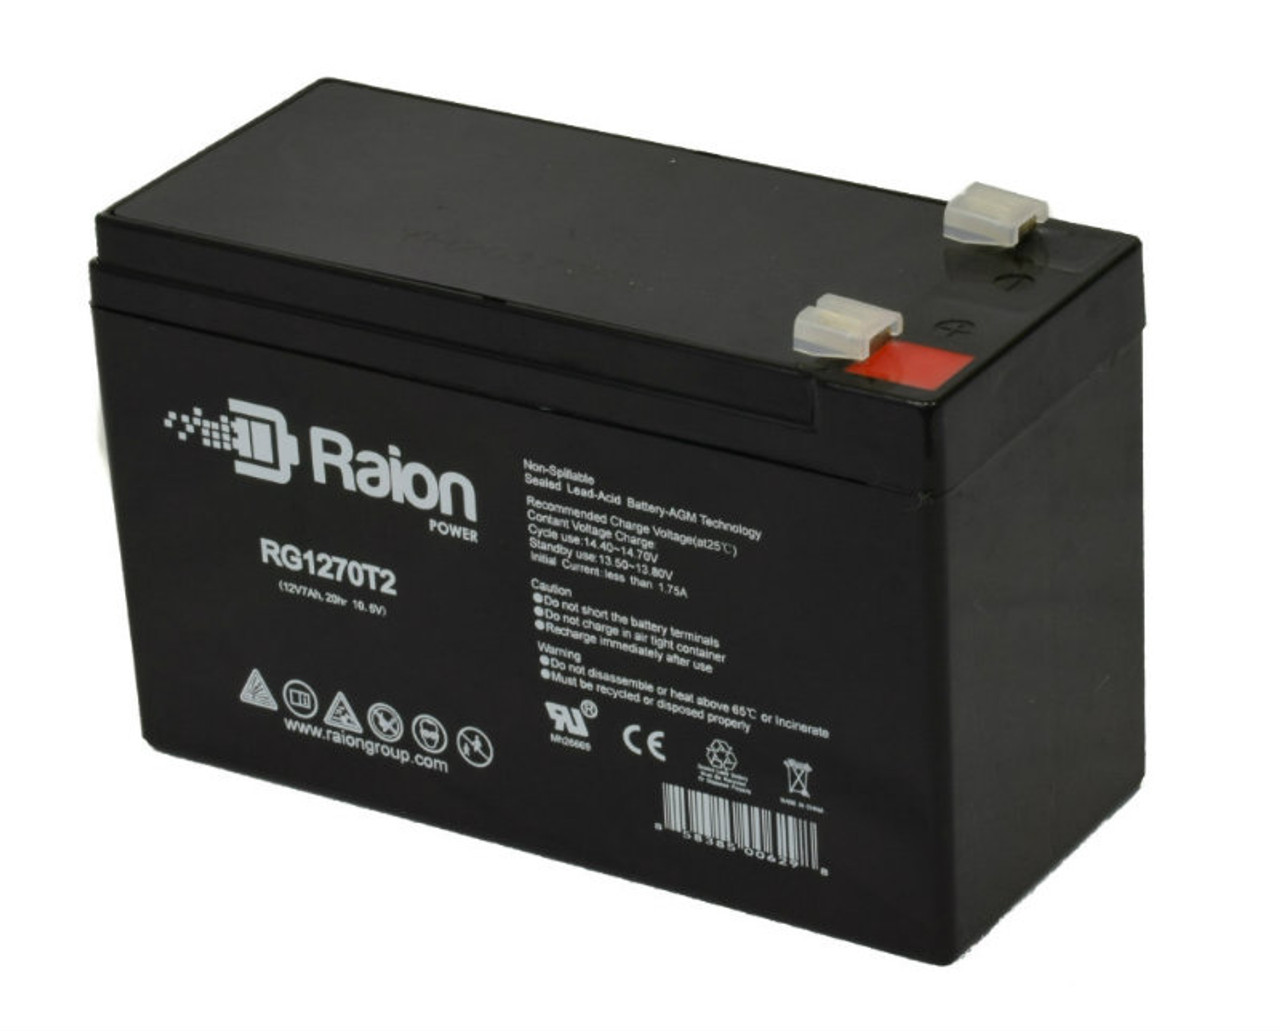 Raion Power RG1270T1 12V 7Ah Non-Spillable Replacement Battery for Expocell P212/70